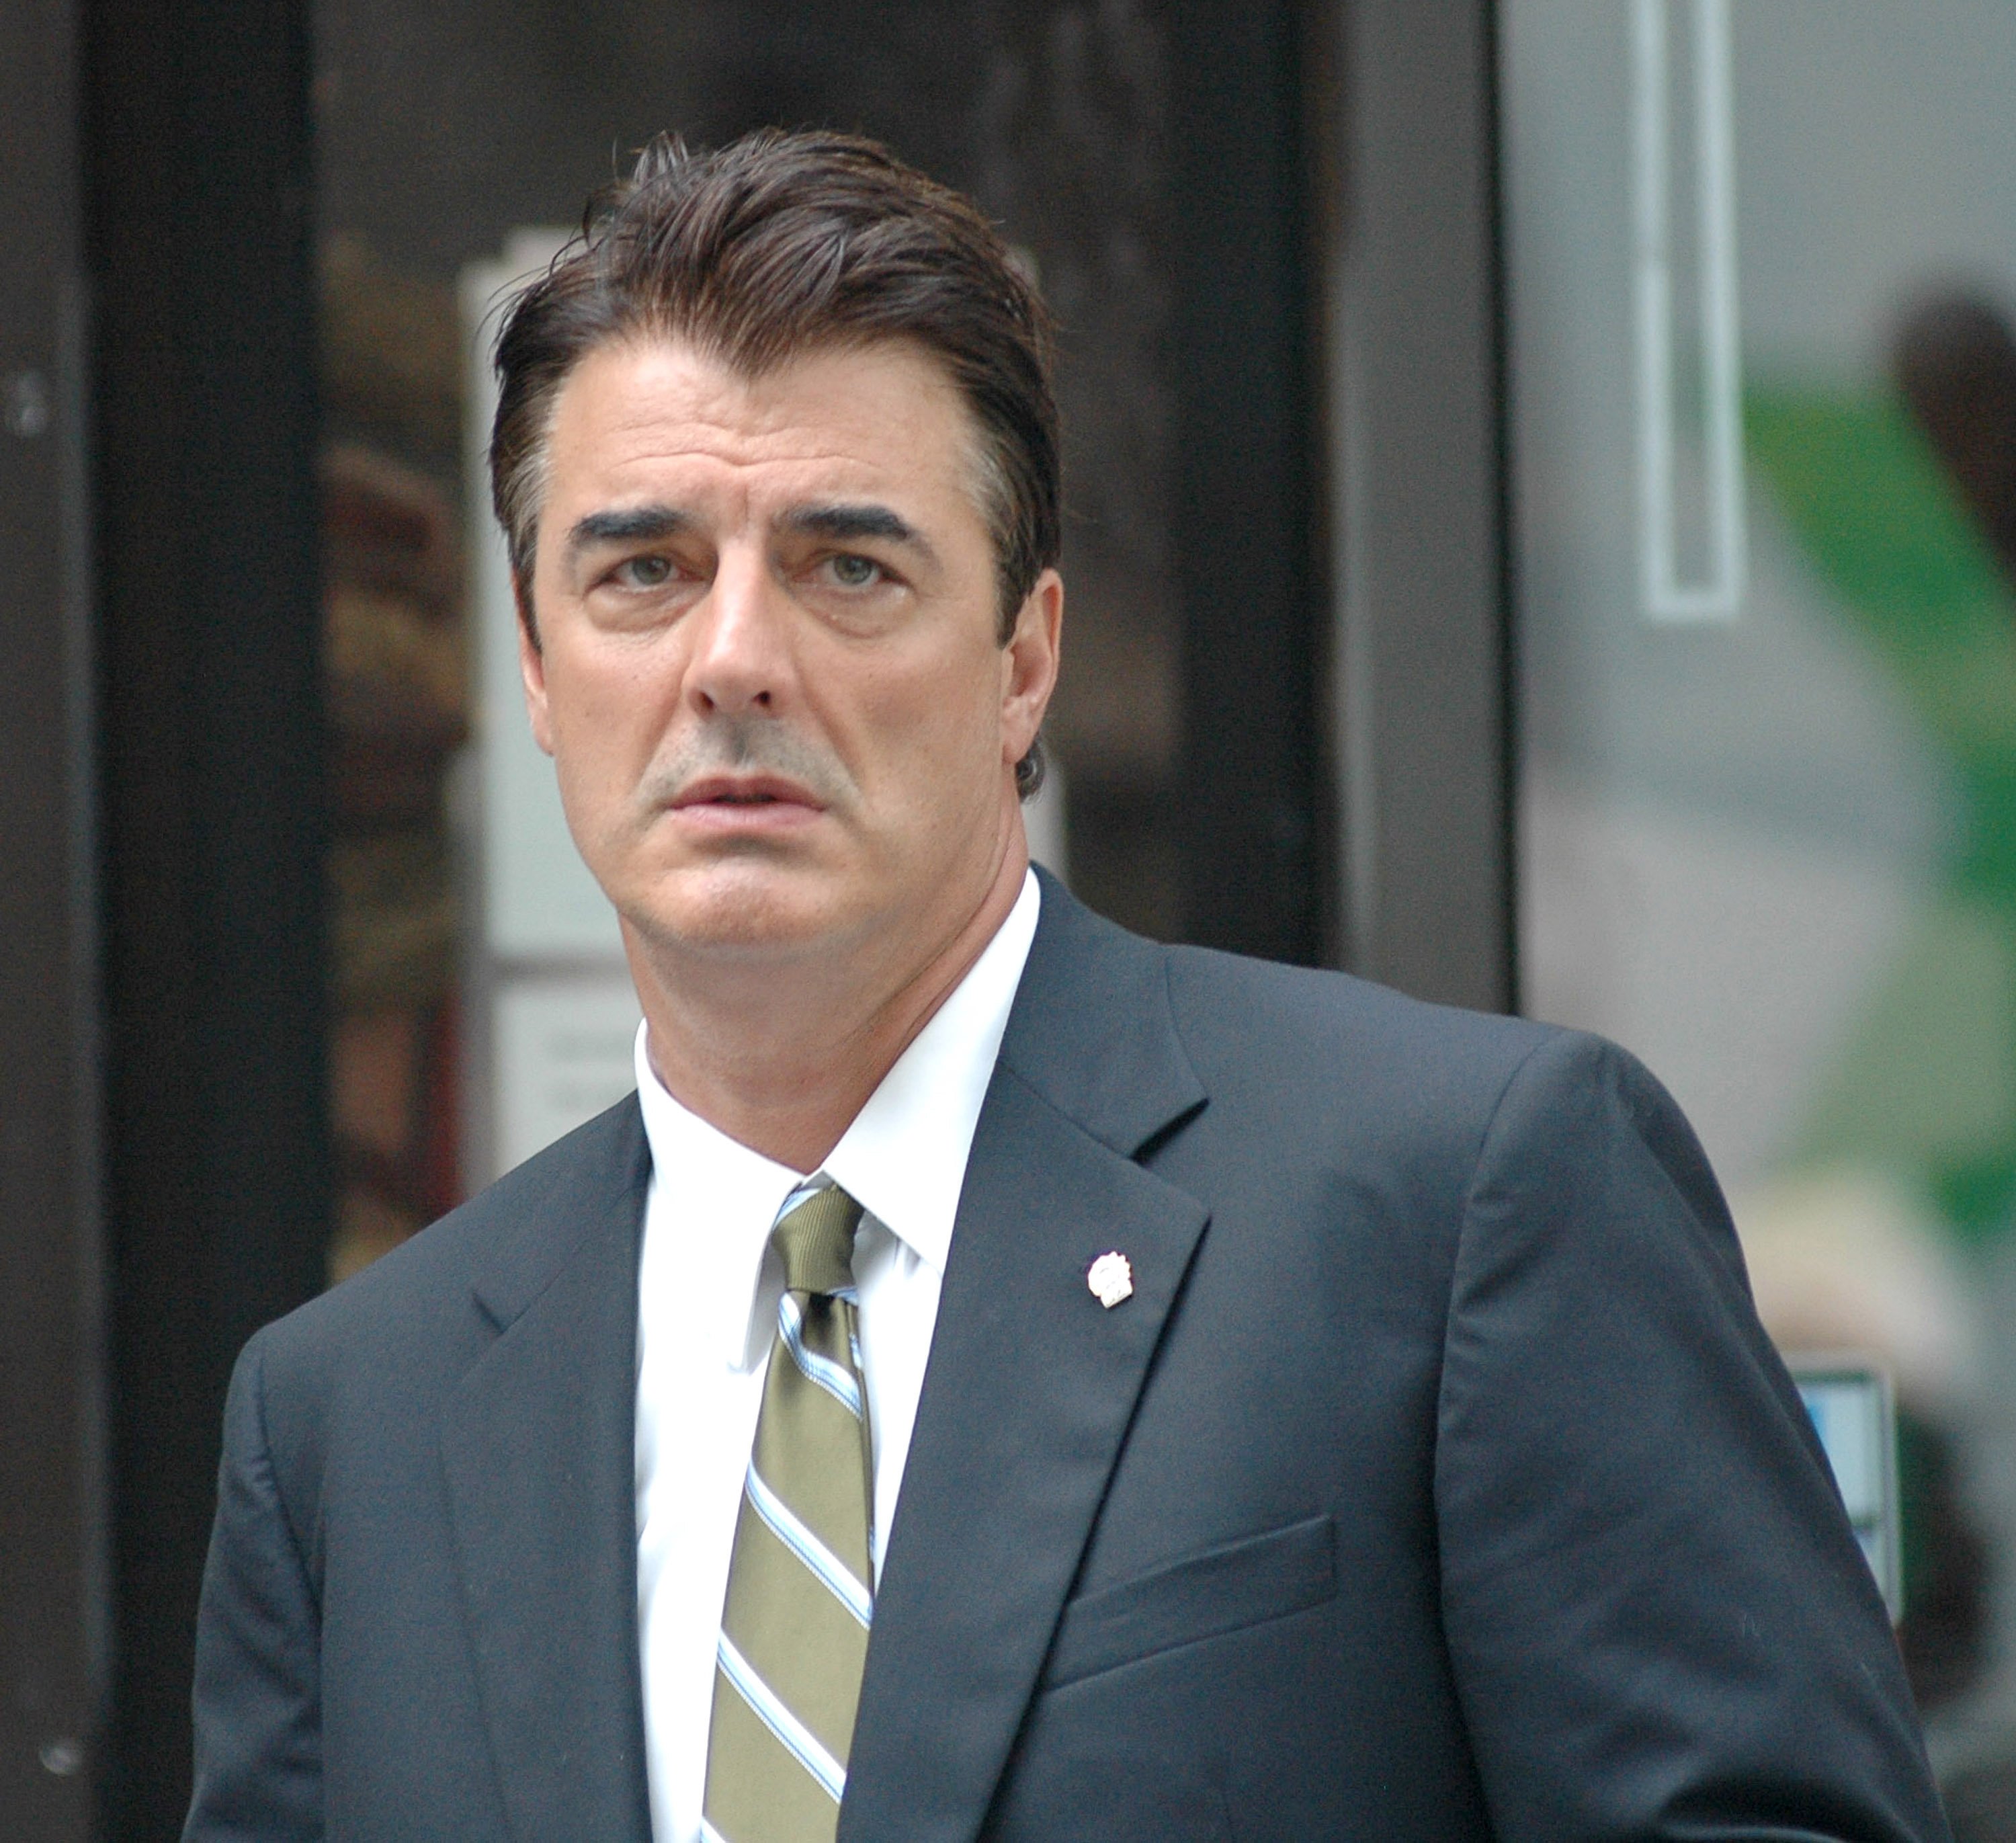 Chris Noth during "Law & Order: Criminal Intent" on location on July 31, 2006 in New York City, New York | Photo: Getty Images